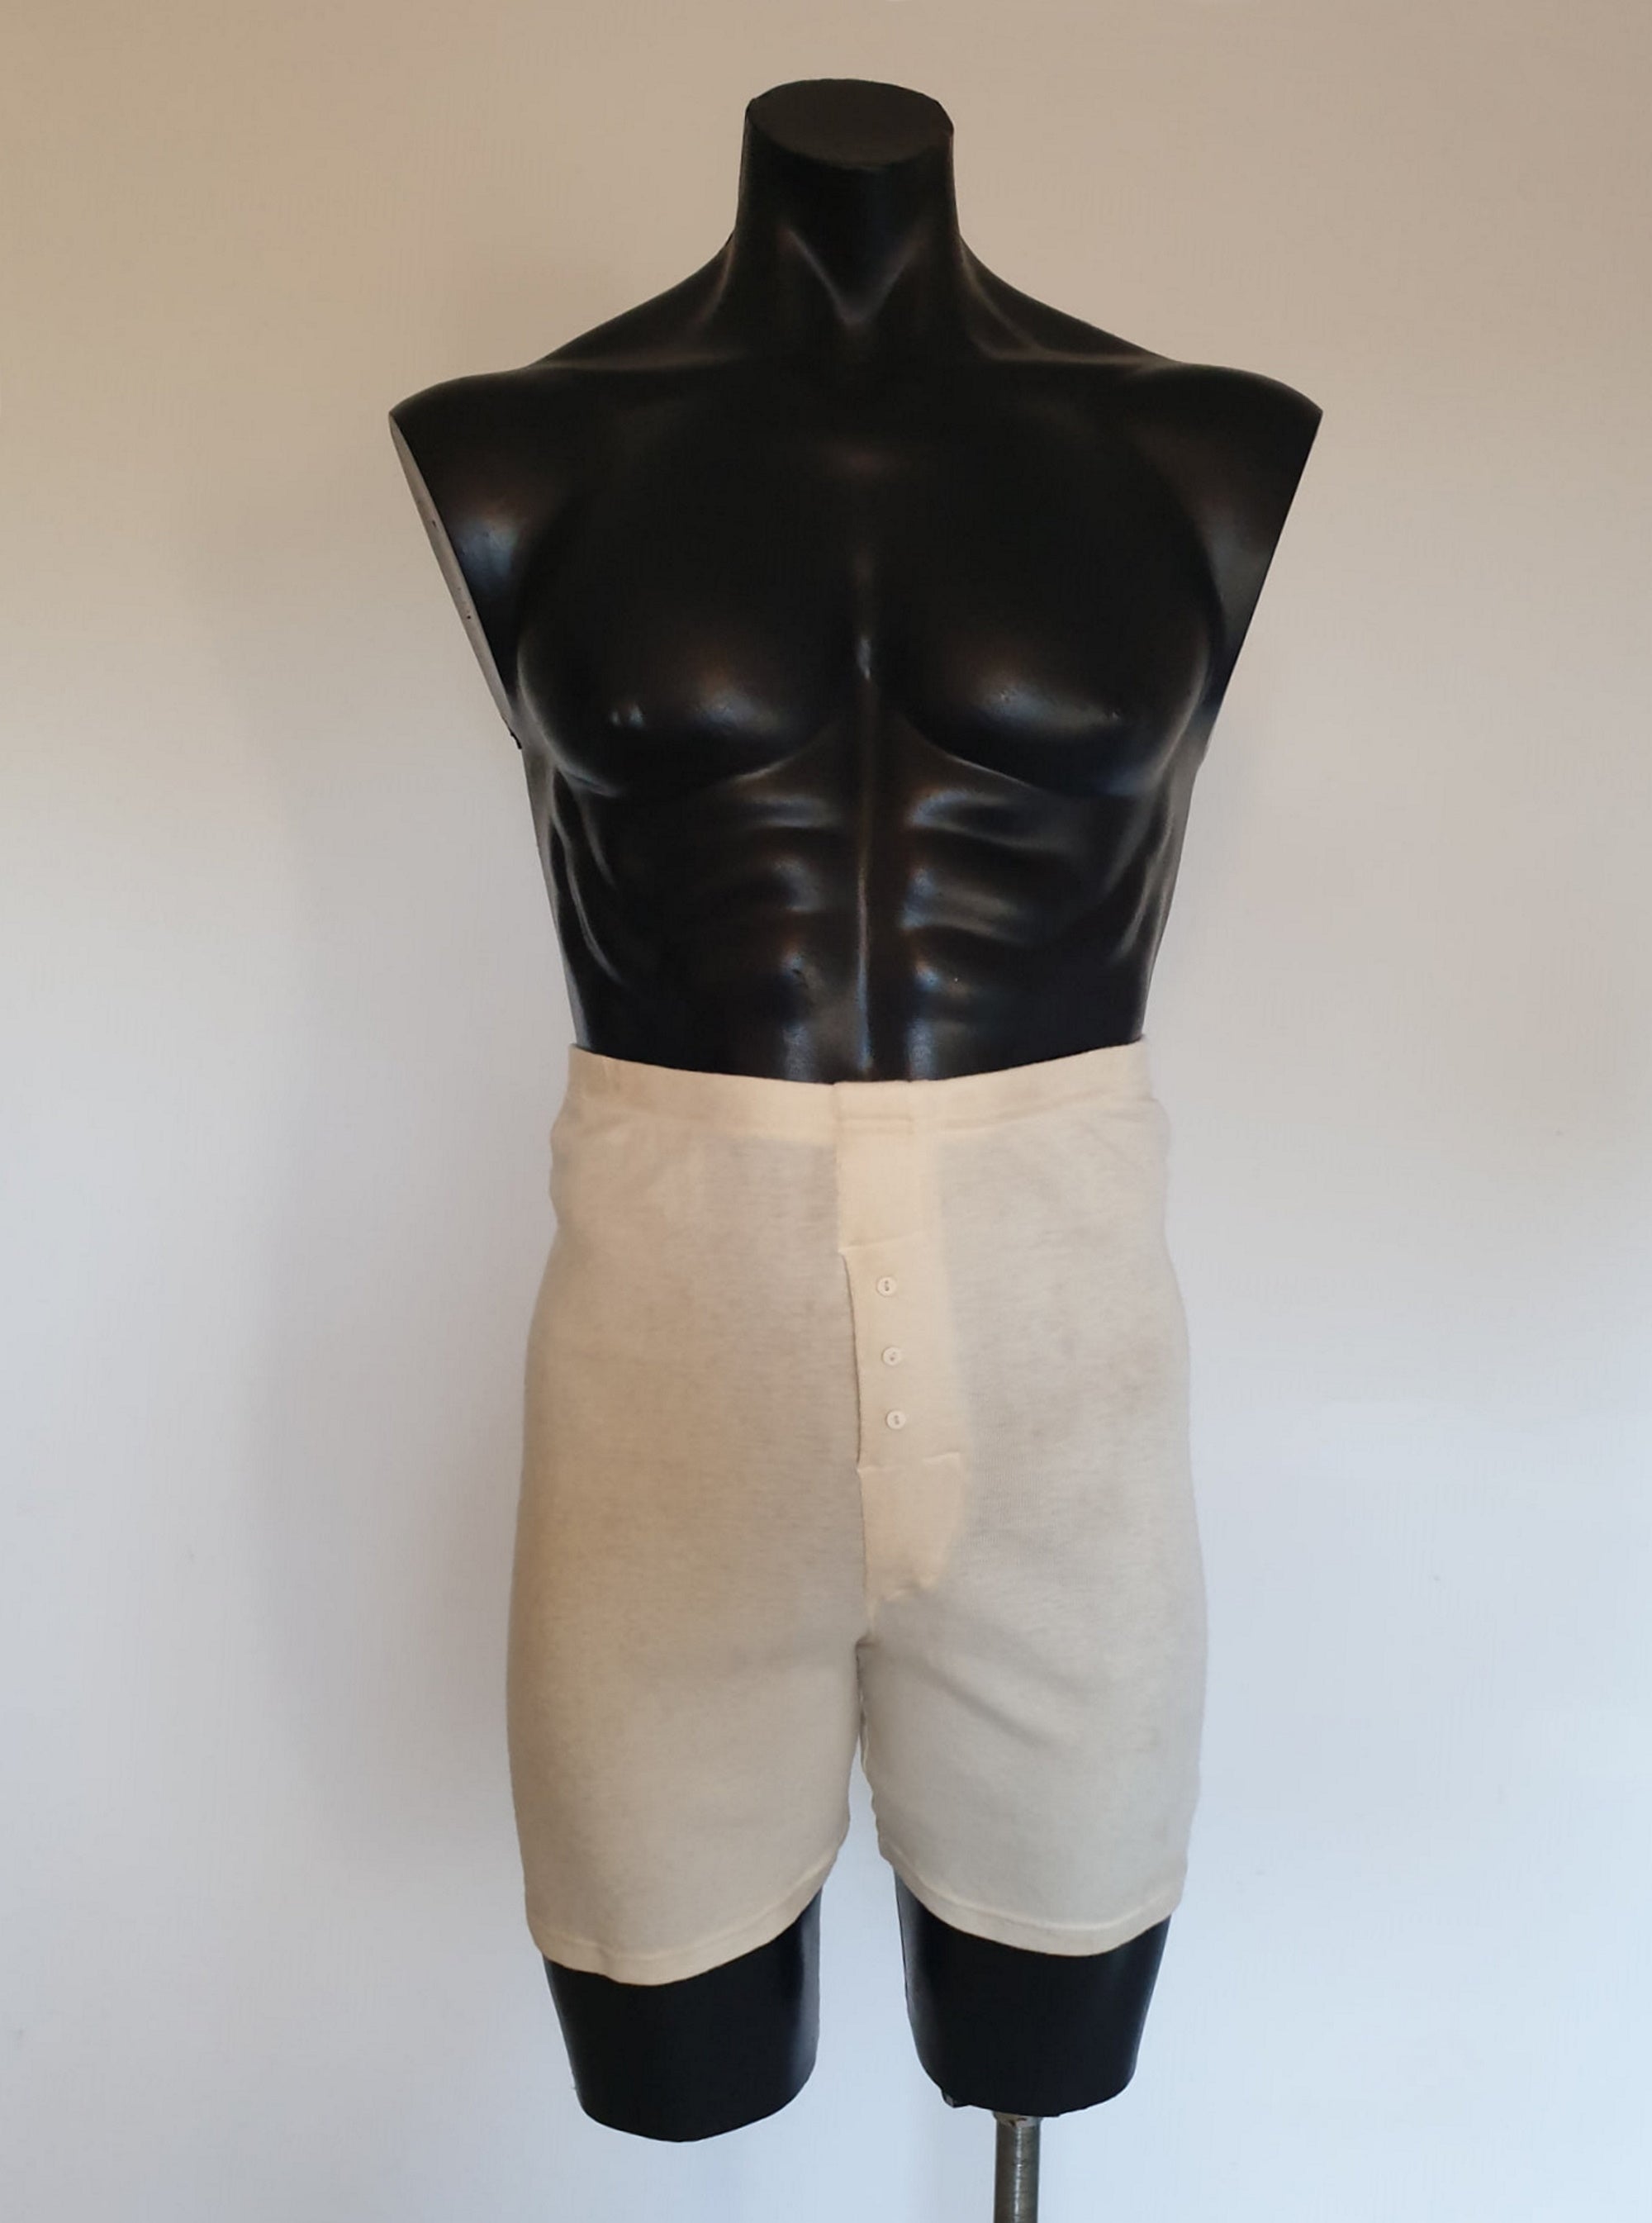 retro vintage style wool thermal trunks small